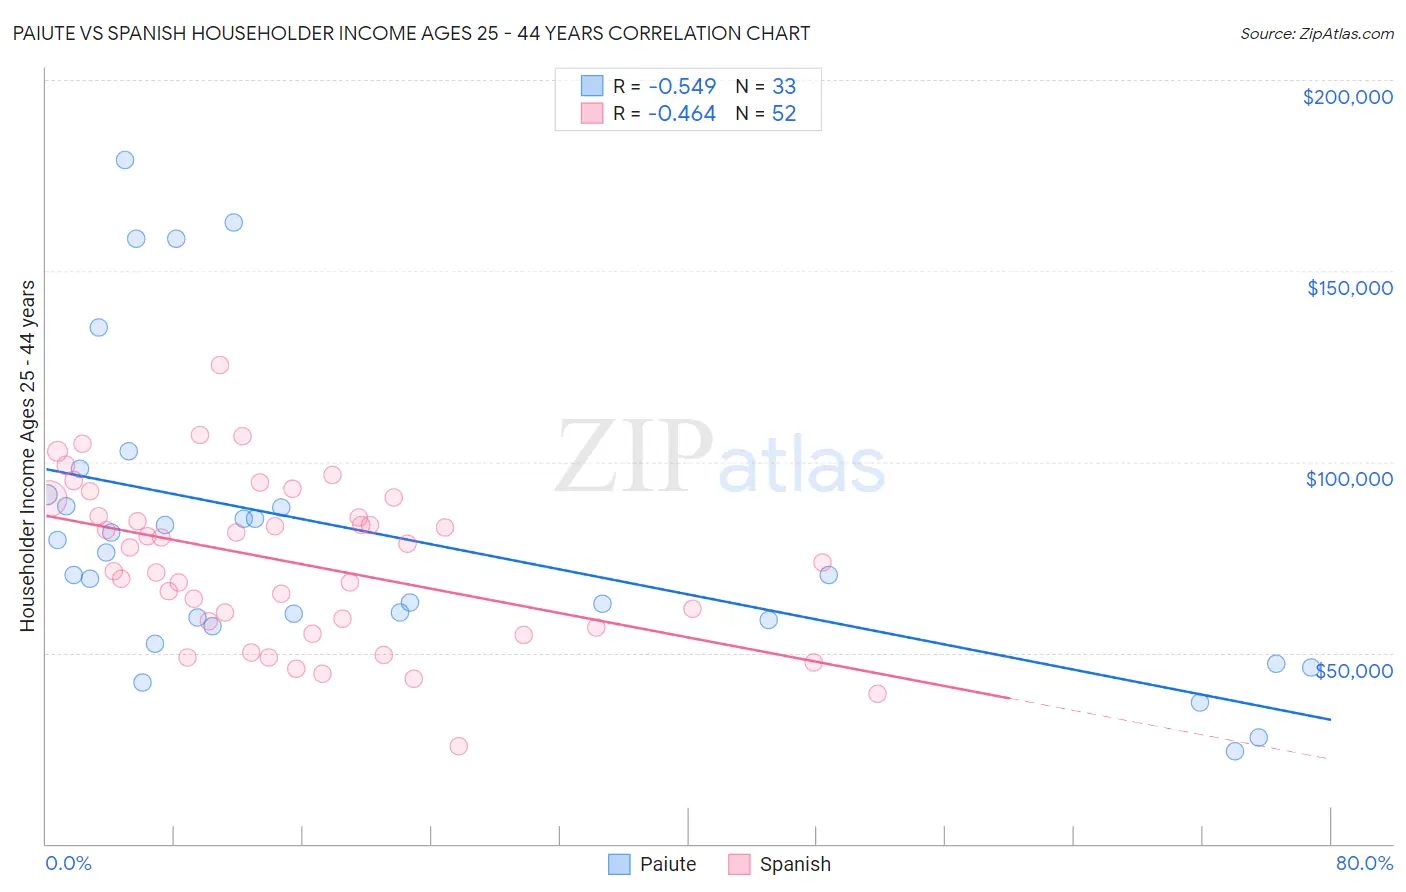 Paiute vs Spanish Householder Income Ages 25 - 44 years